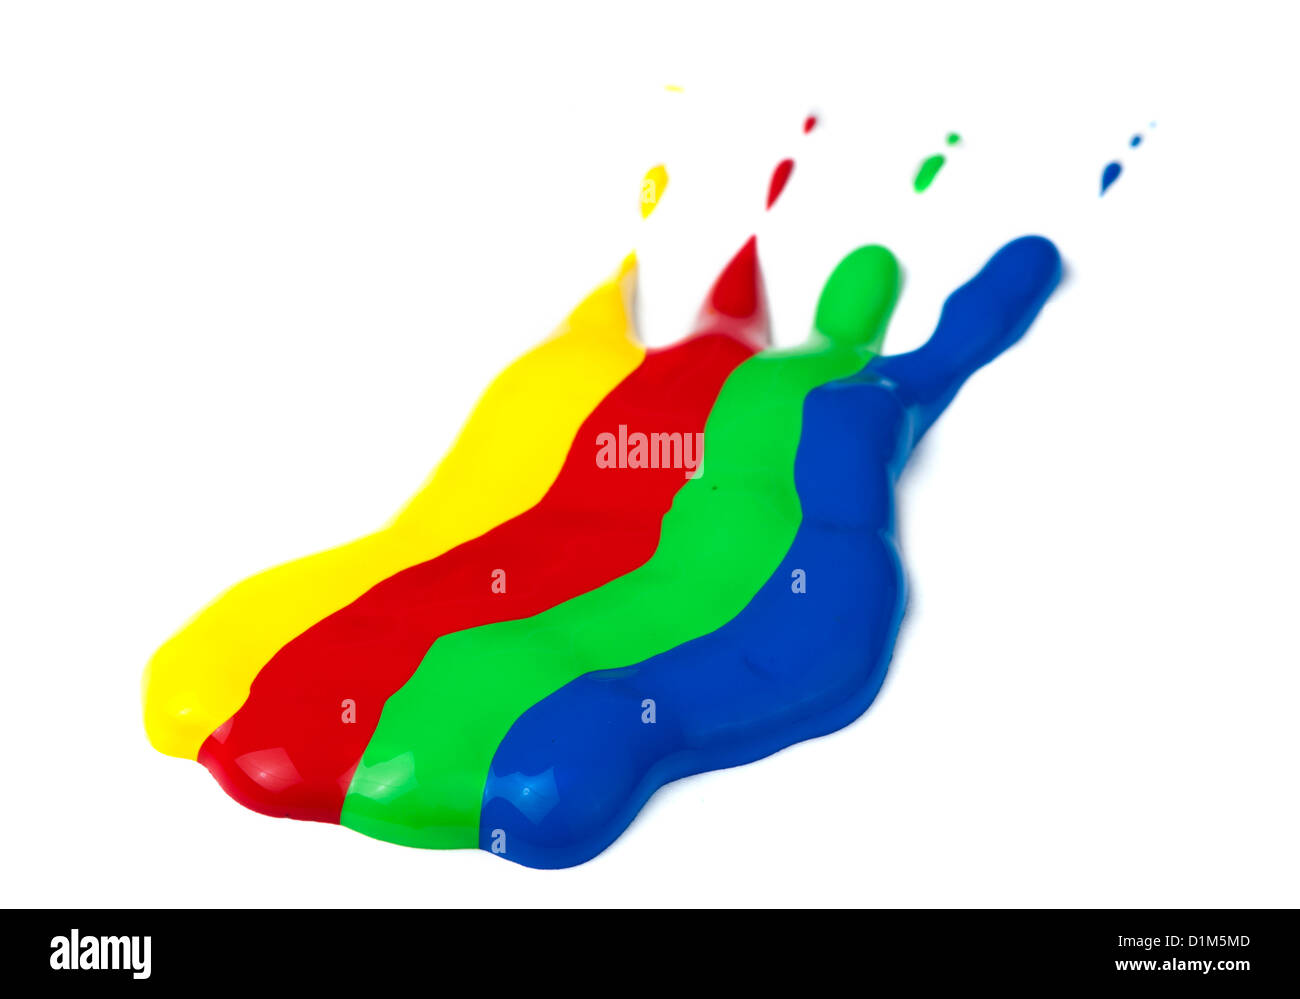 Paint coated on paper. Even paint squeezed from tube. Red, green, blue and yellow colors. Stock Photo